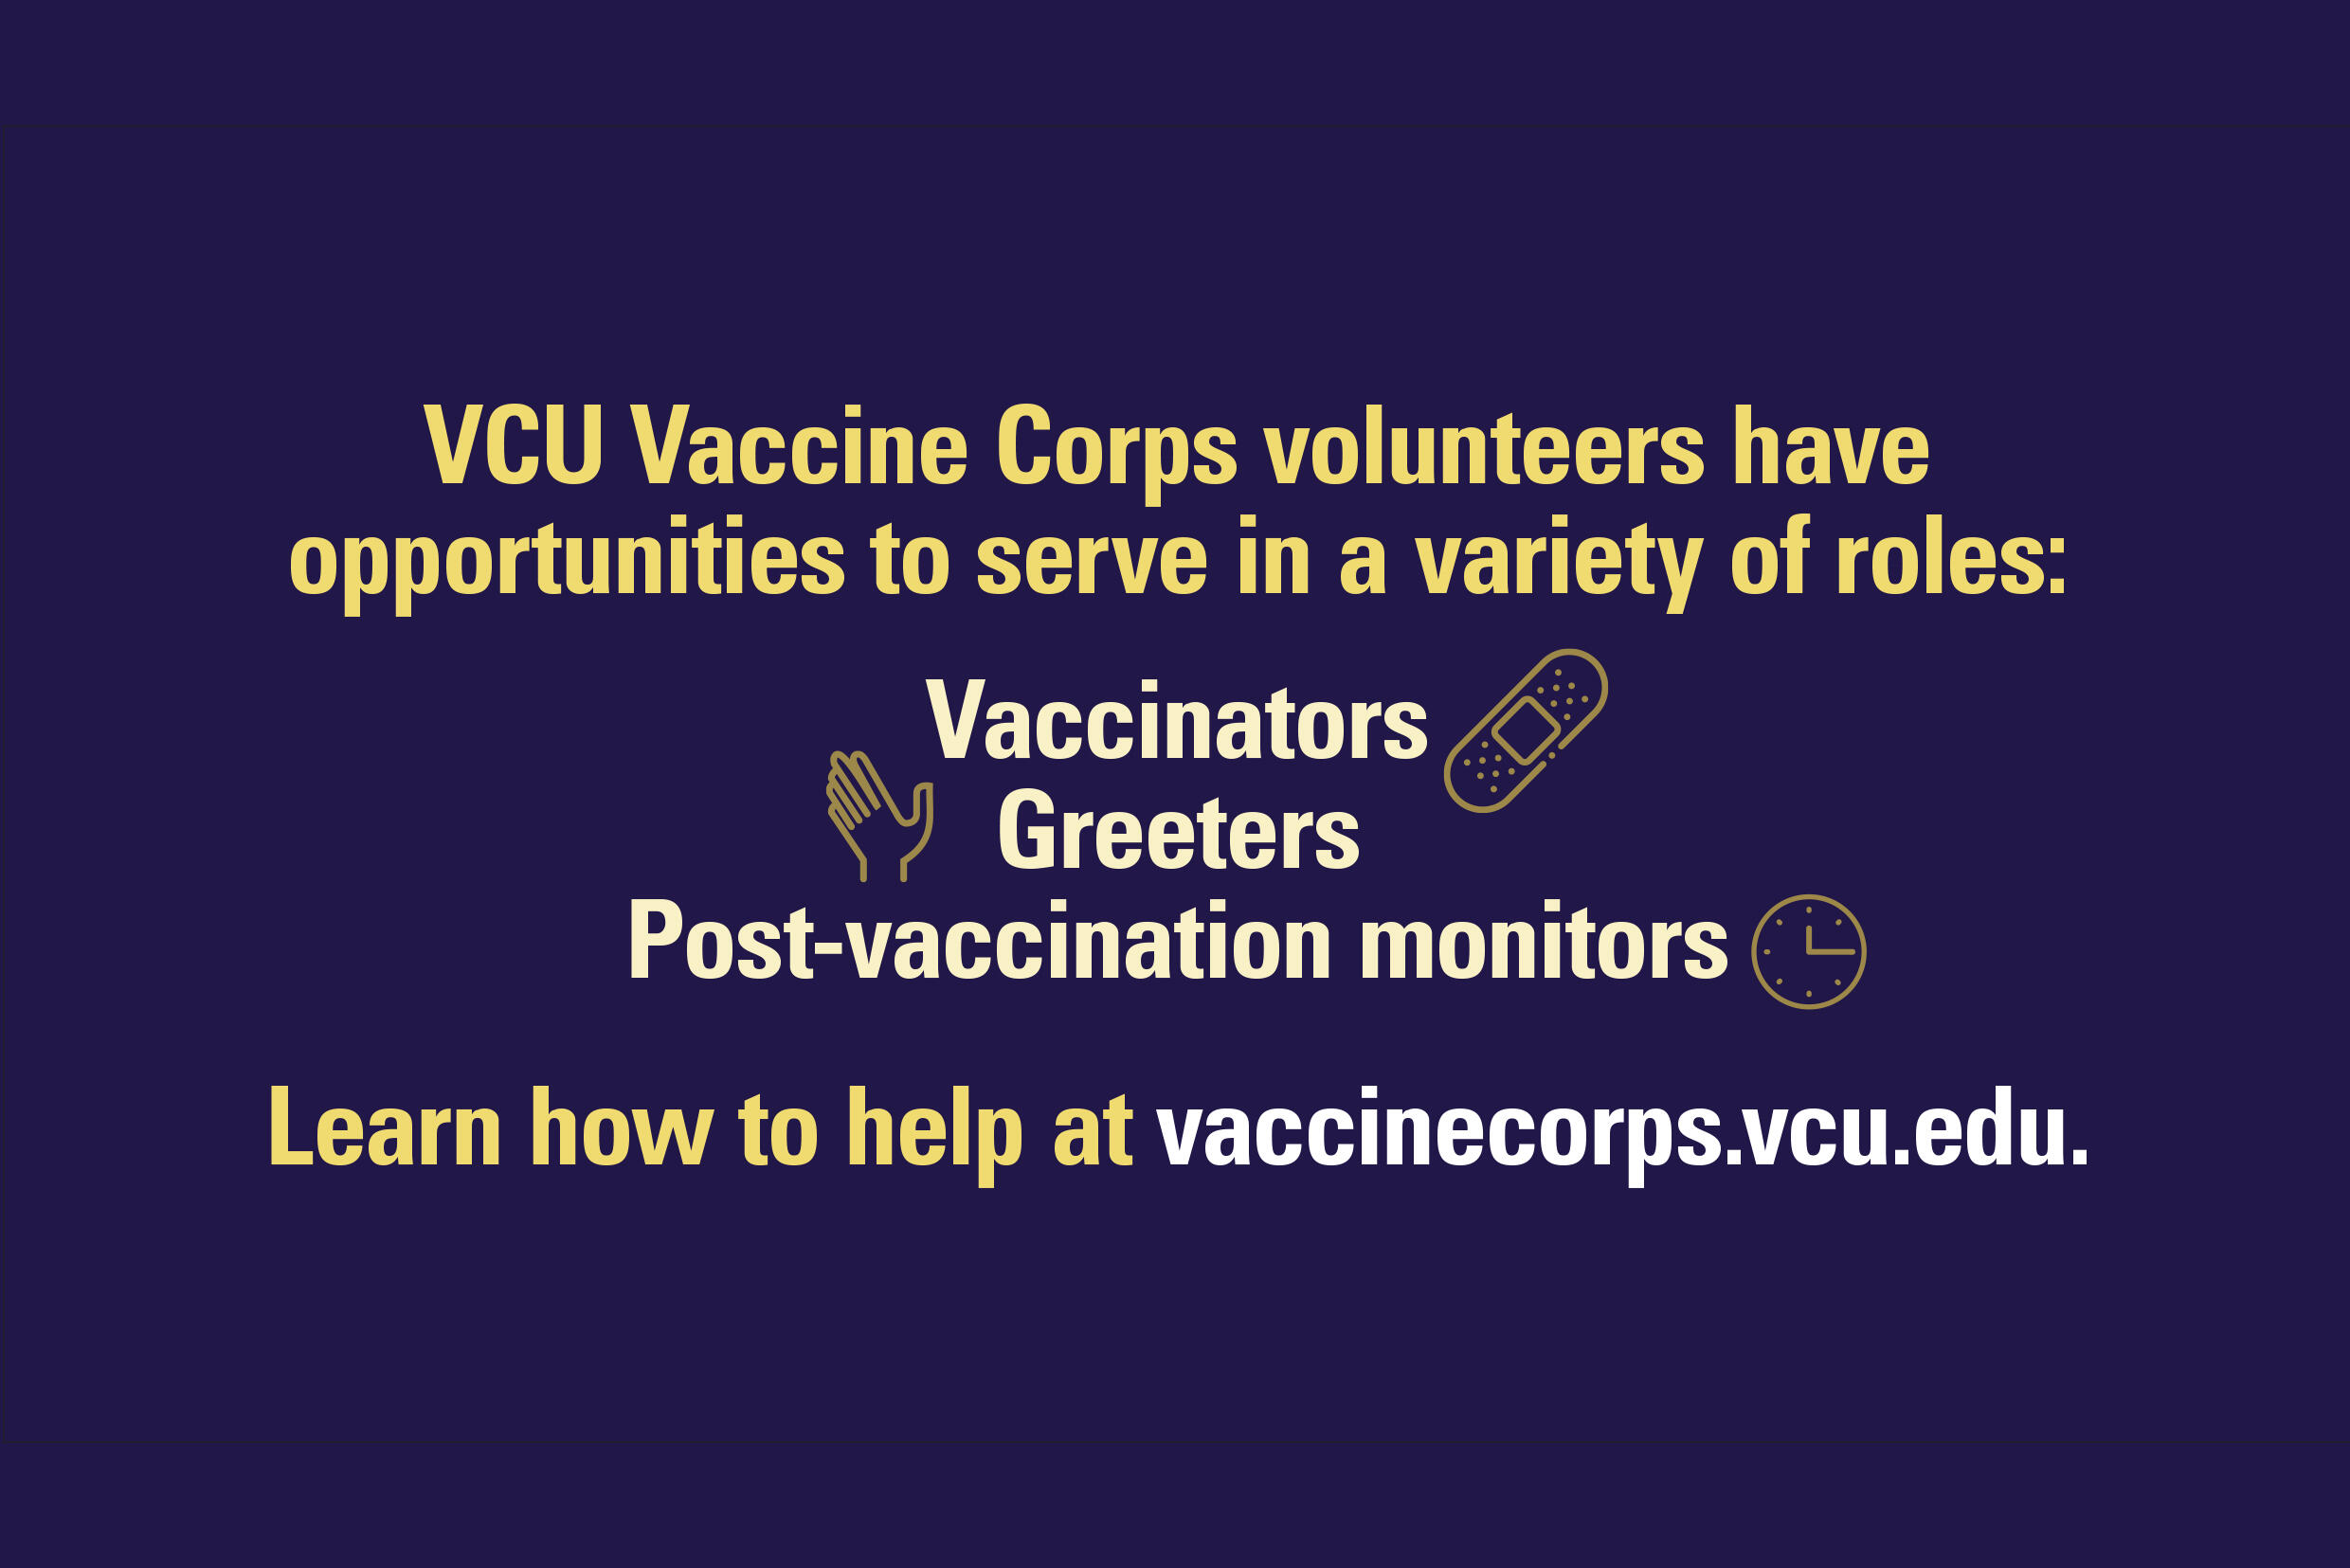 "VCU Vaccine Corps volunteers have opportunities to serve in a variety of roles: Vaccinators, Greeters, Post-vaccination monitors. Learn how to help at vaccinecorps.vcu.edu"